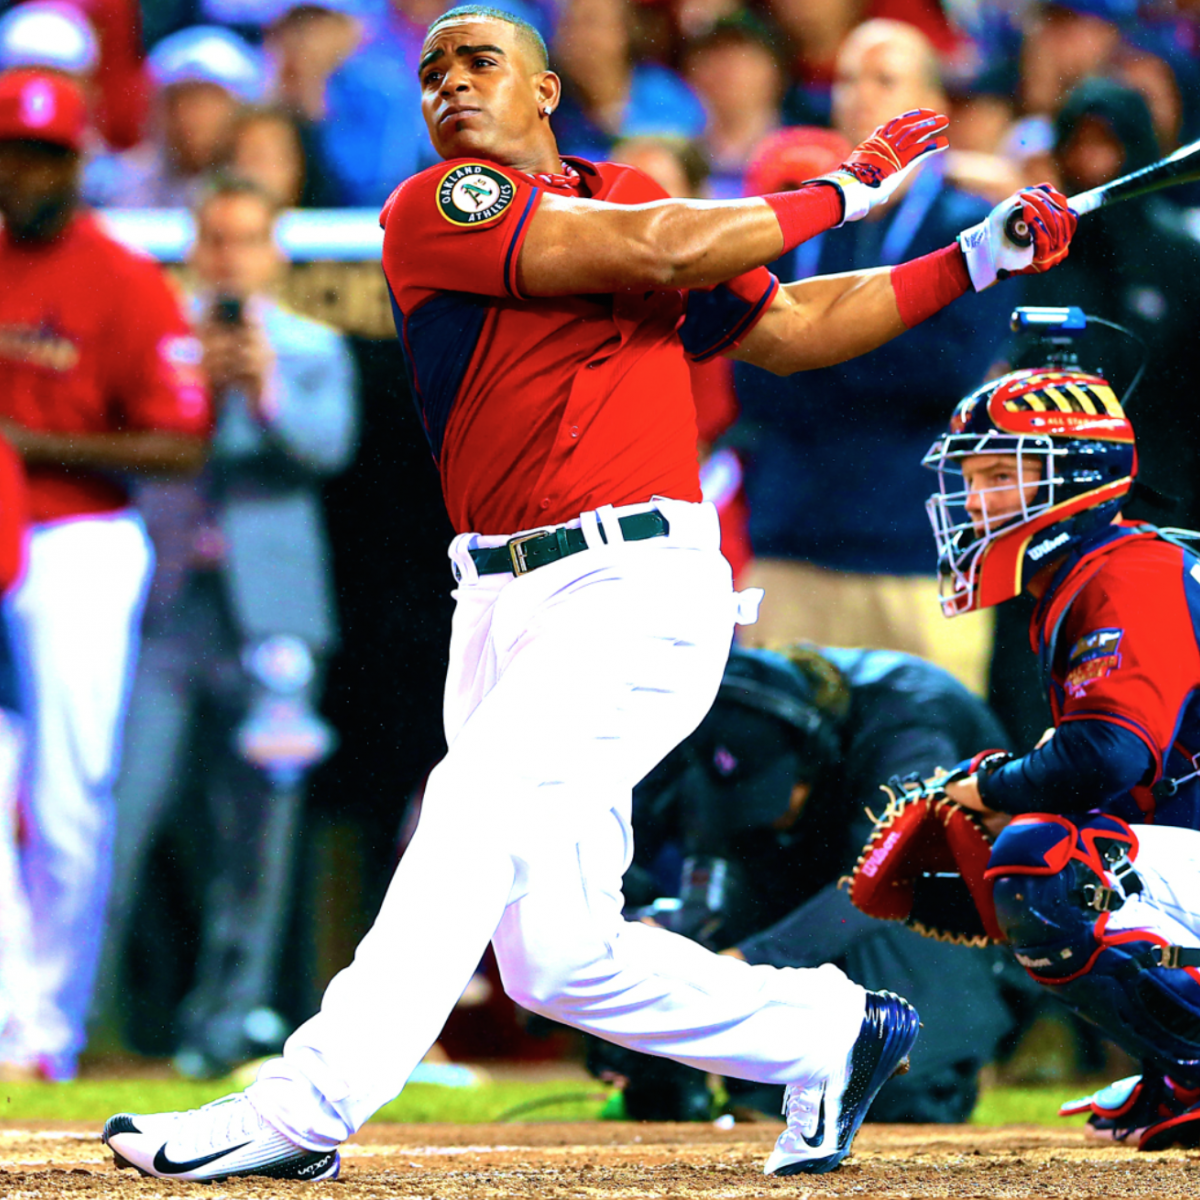 MLB Home Run Derby 2014 Results: Winner, Twitter Reaction and